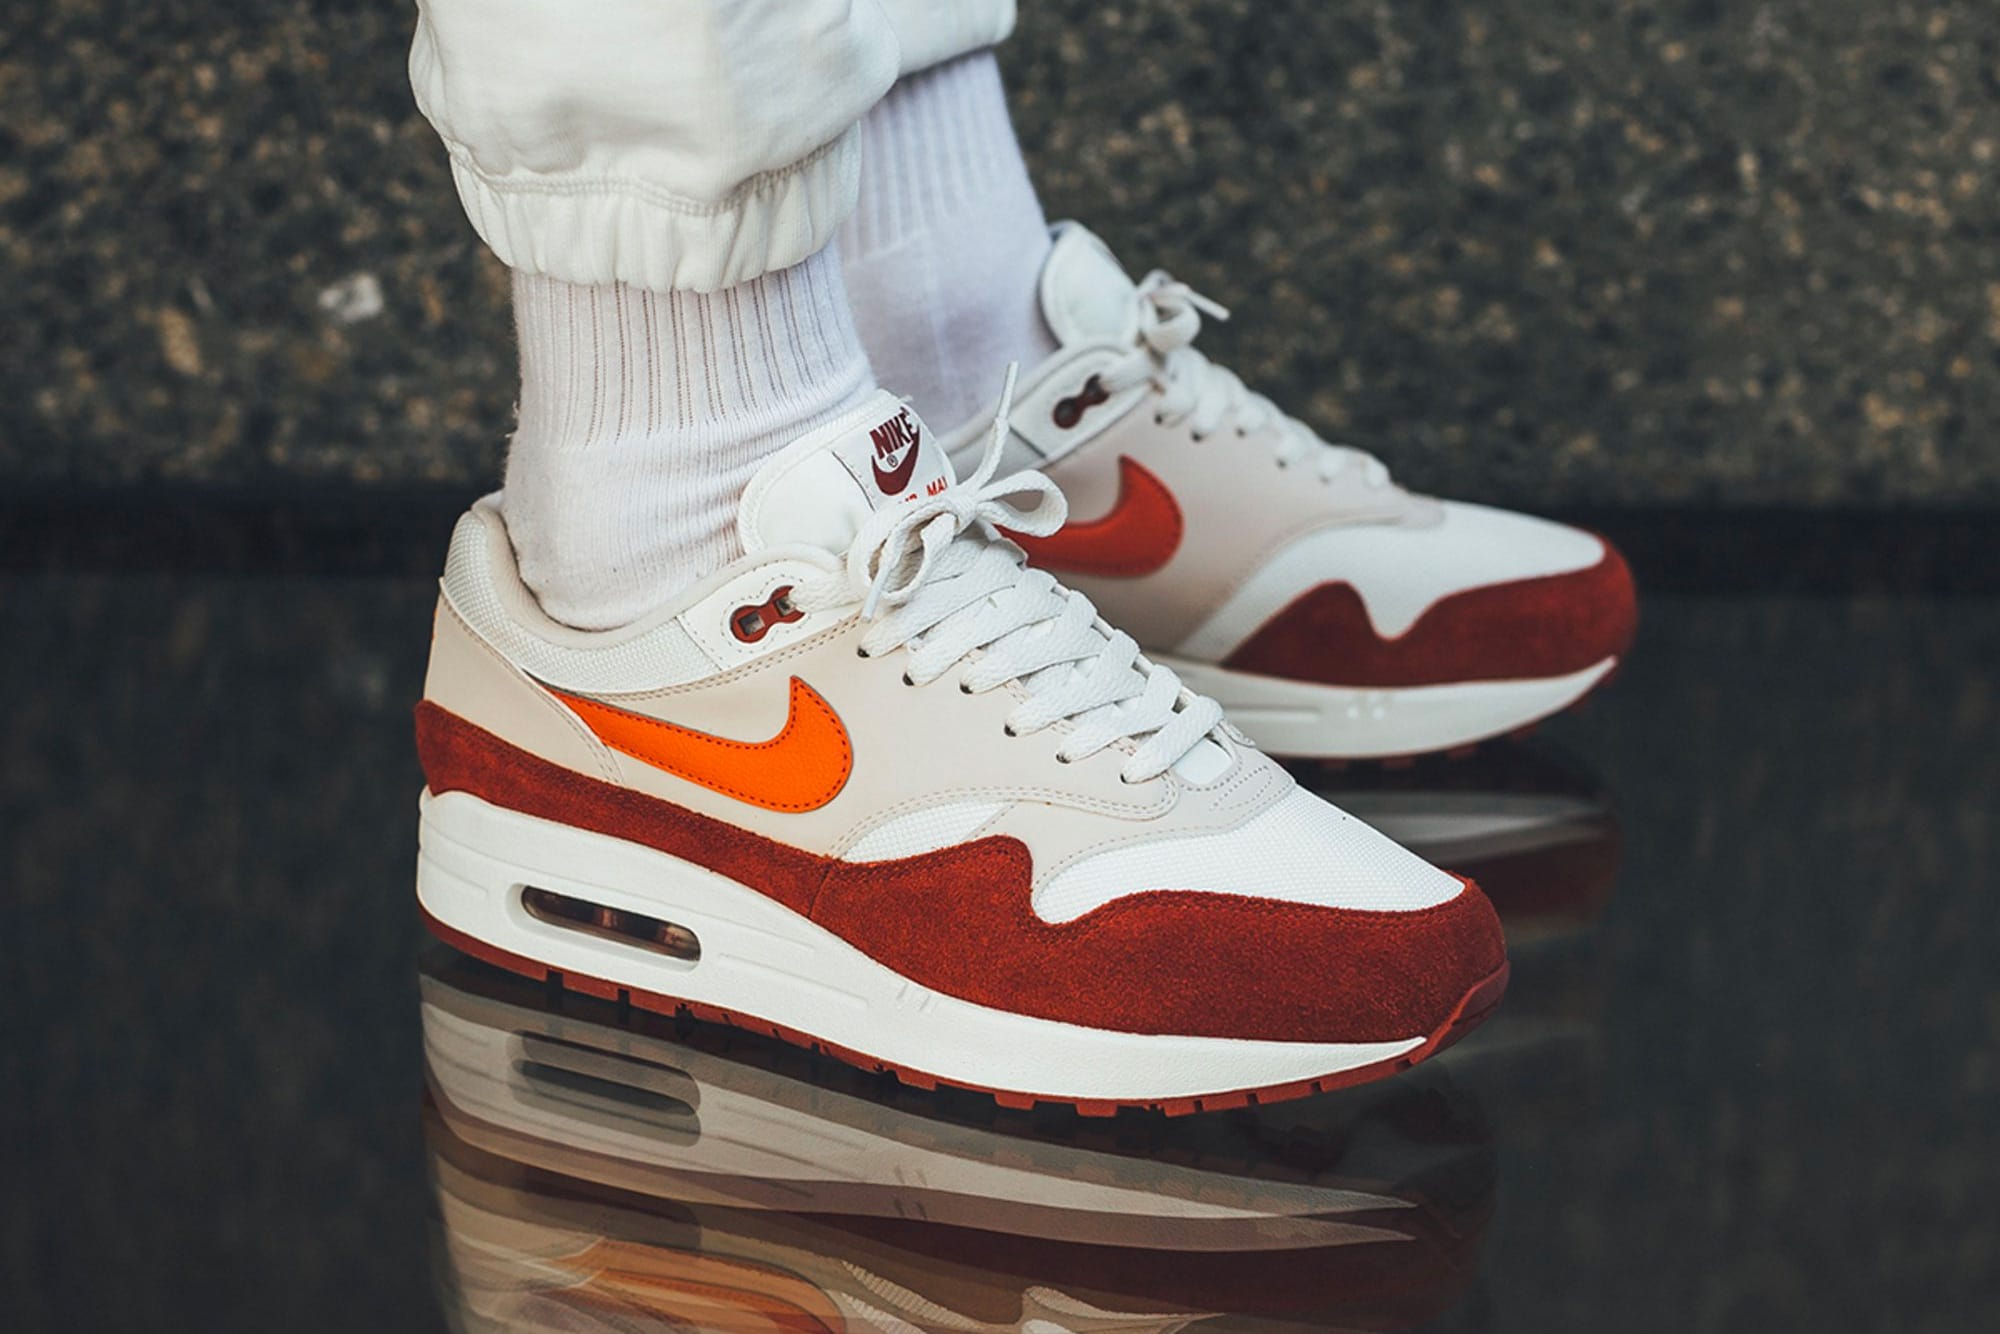 Nike Air Max 1 Curry On-Feet Vintage Coral Mars Stone release date drop info